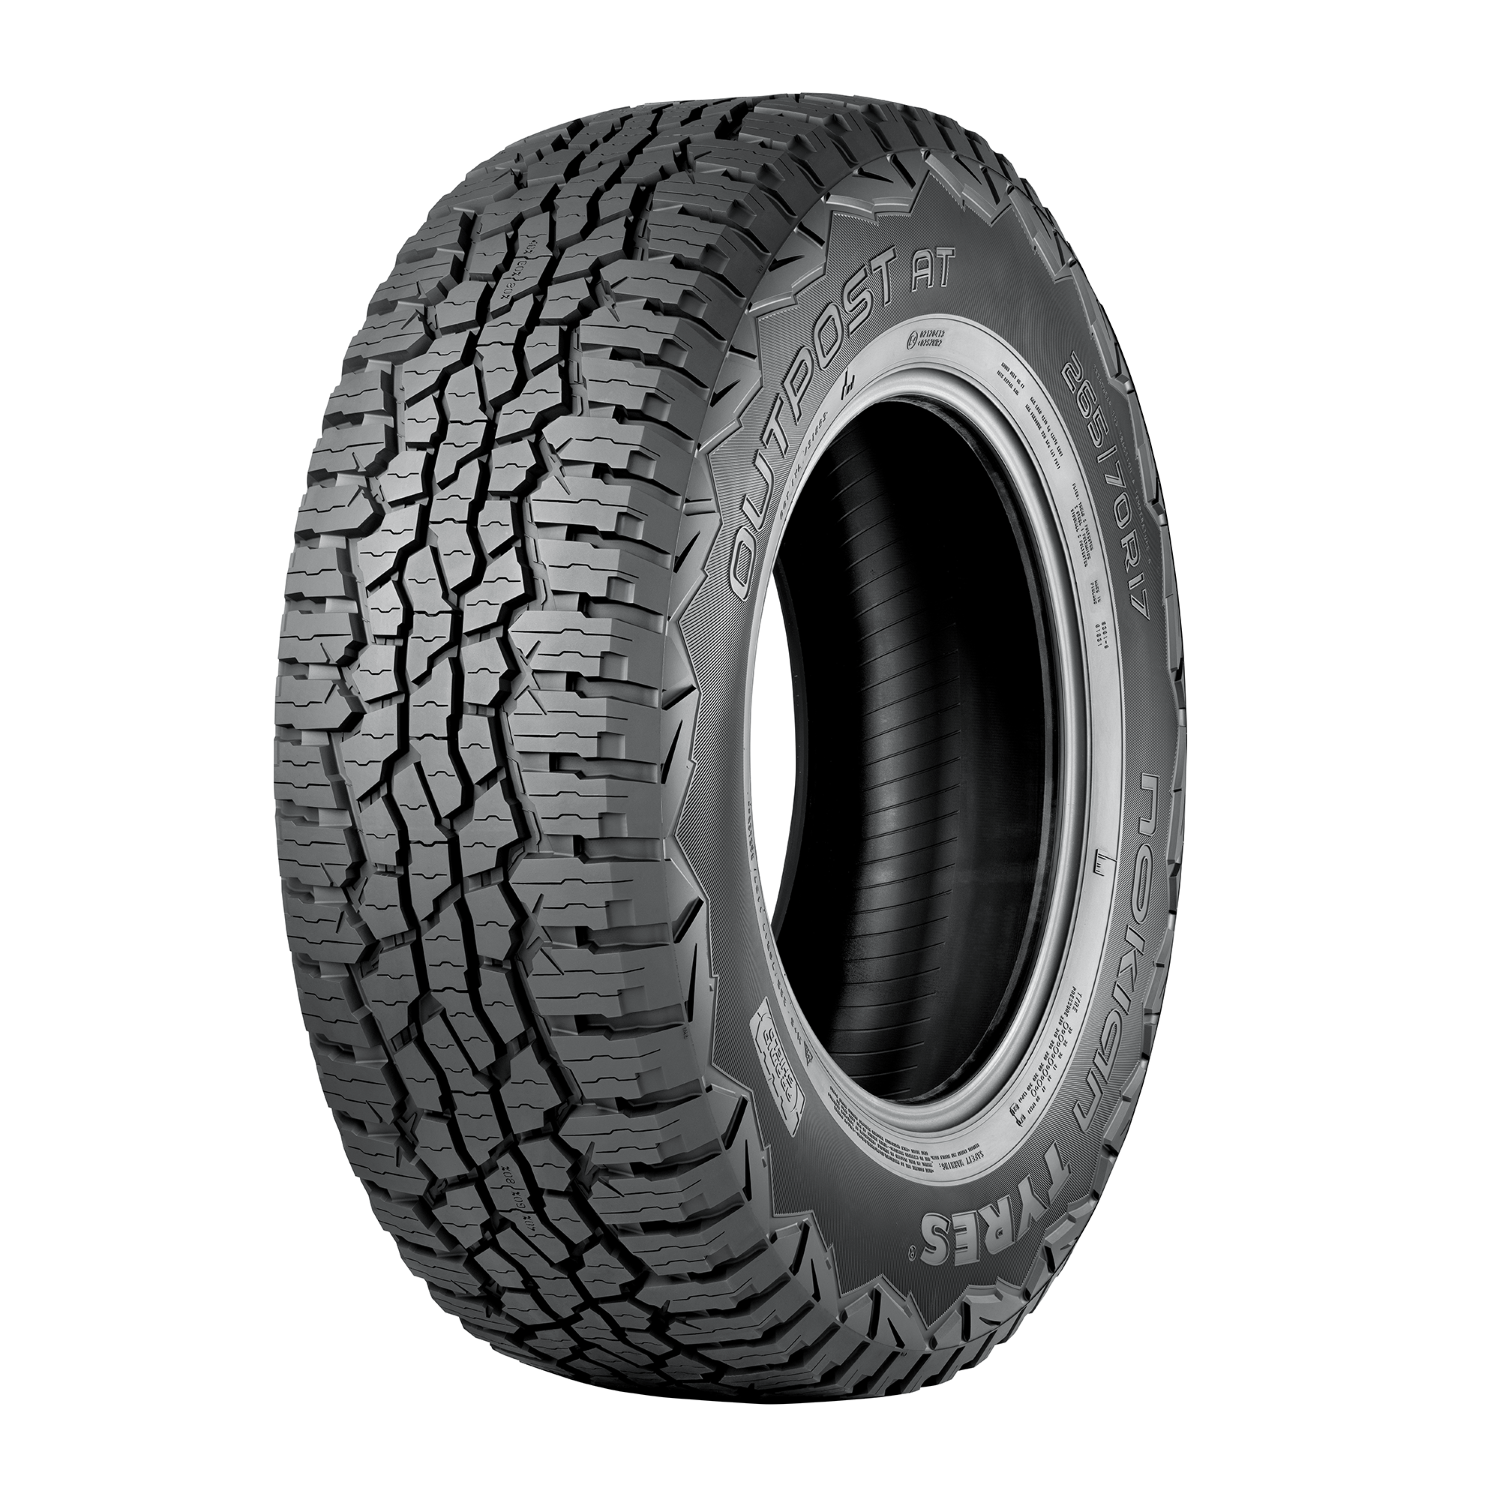 Nokian Outpost AT - Reviews Tire Tests and